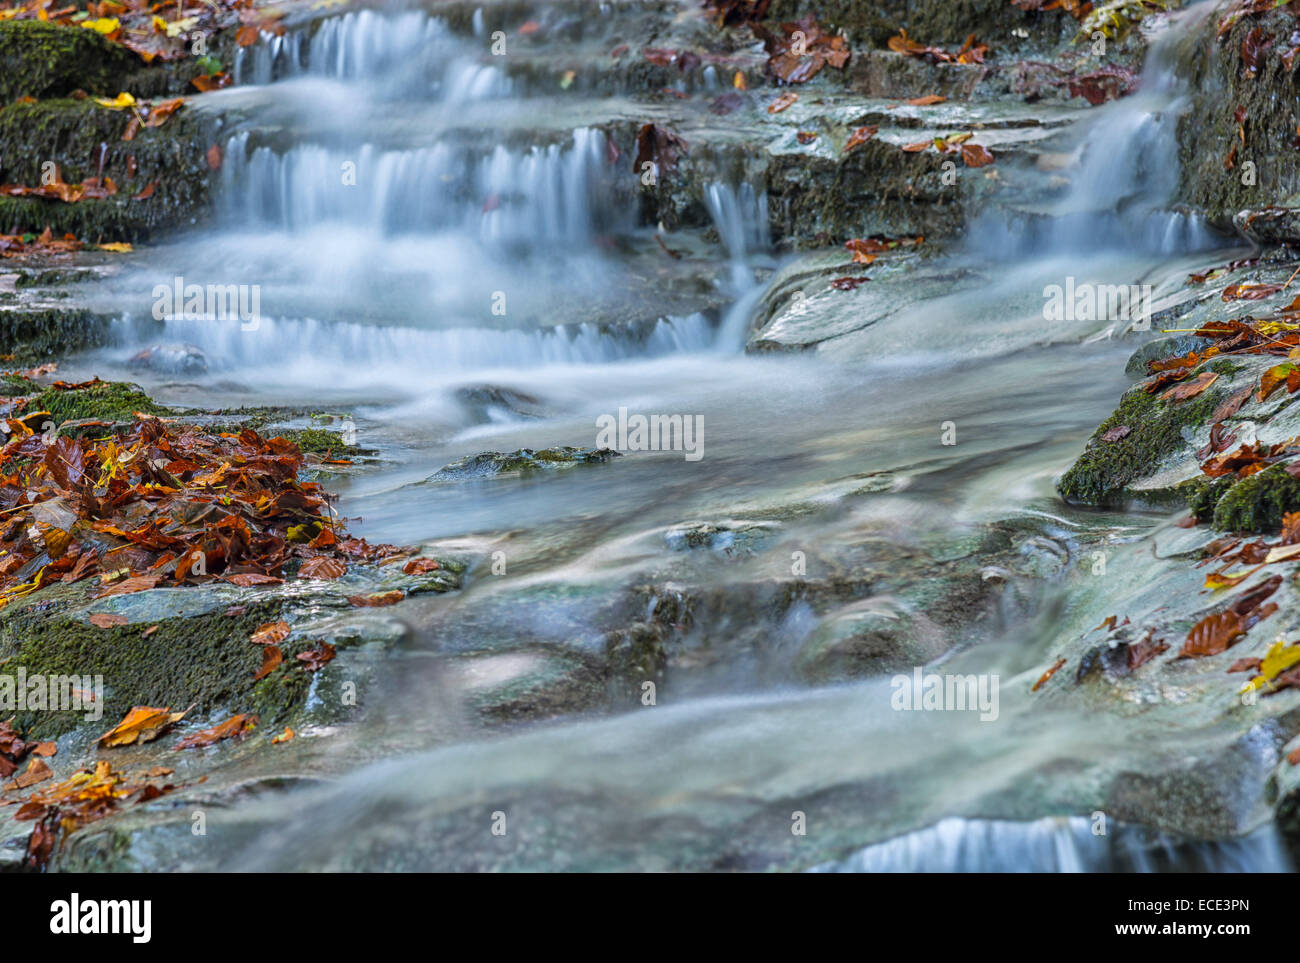 Waterfall in the forest in autumn, Monte Cucco Regional Park, Umbria, Italy Stock Photo